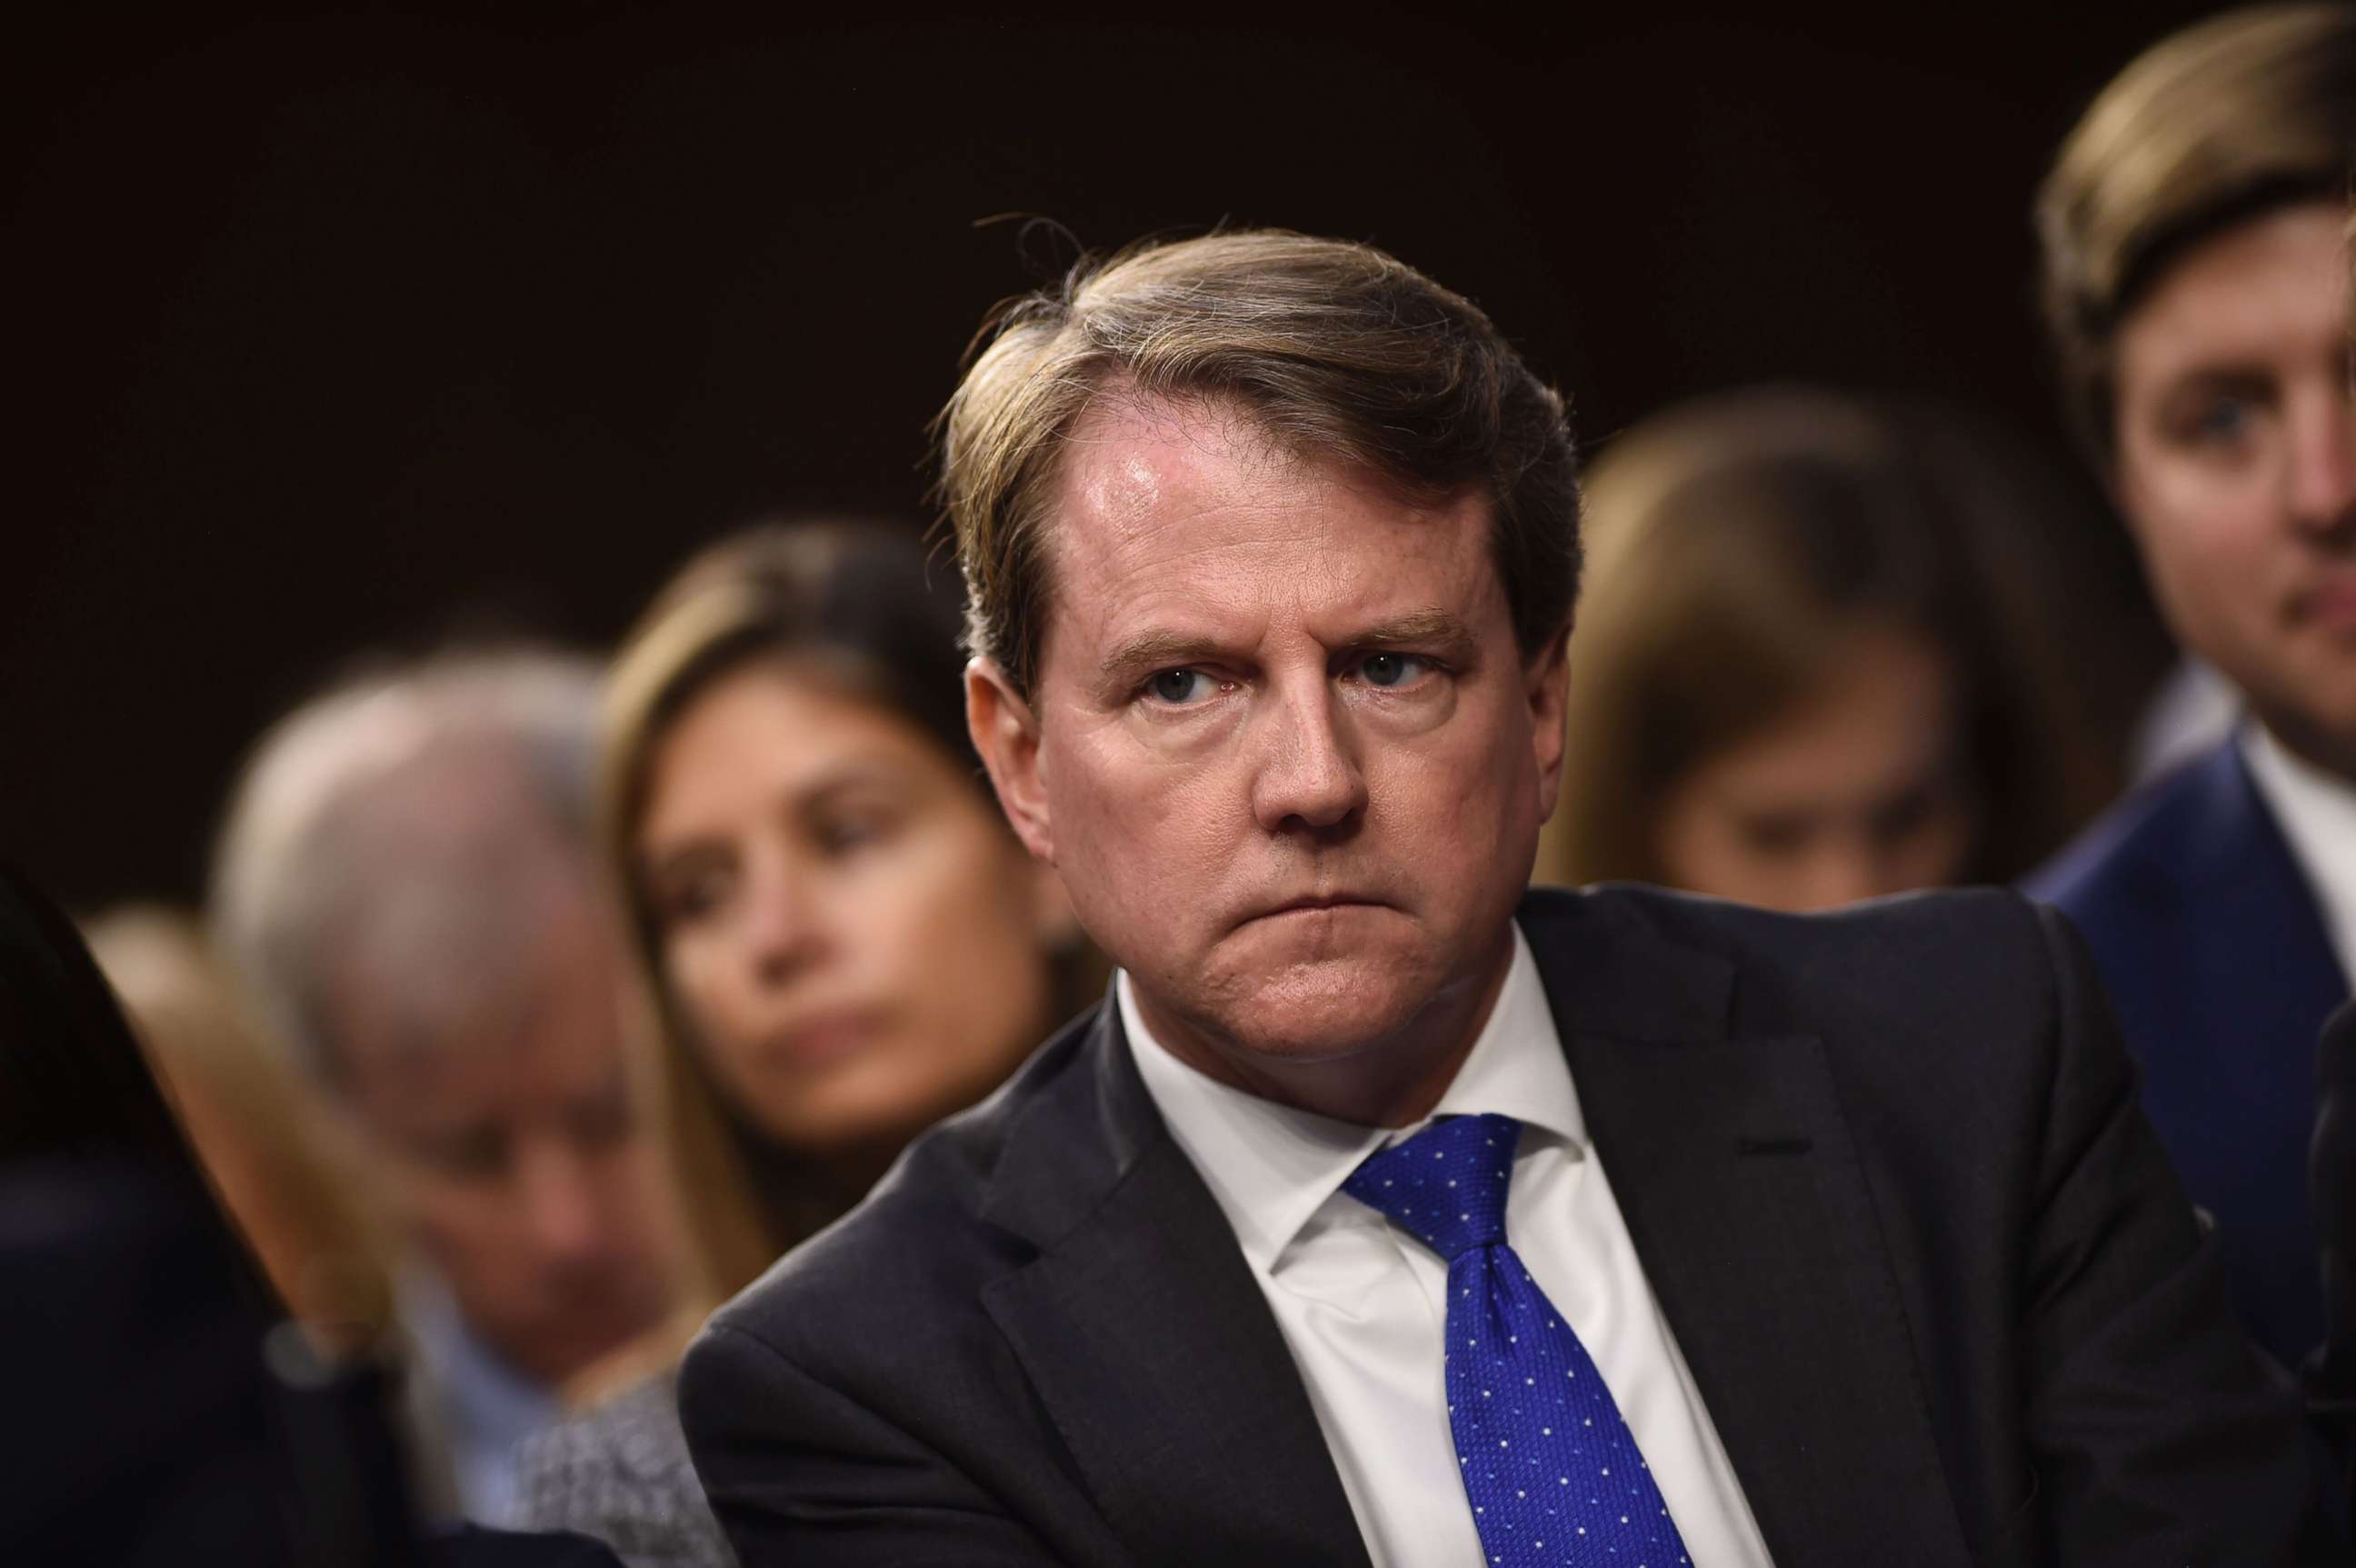 PHOTO: White House Counsel Don McGahn listens during a hearing of the Senate Judiciary Committee, Sept. 4, 2018, in Washington, D.C.